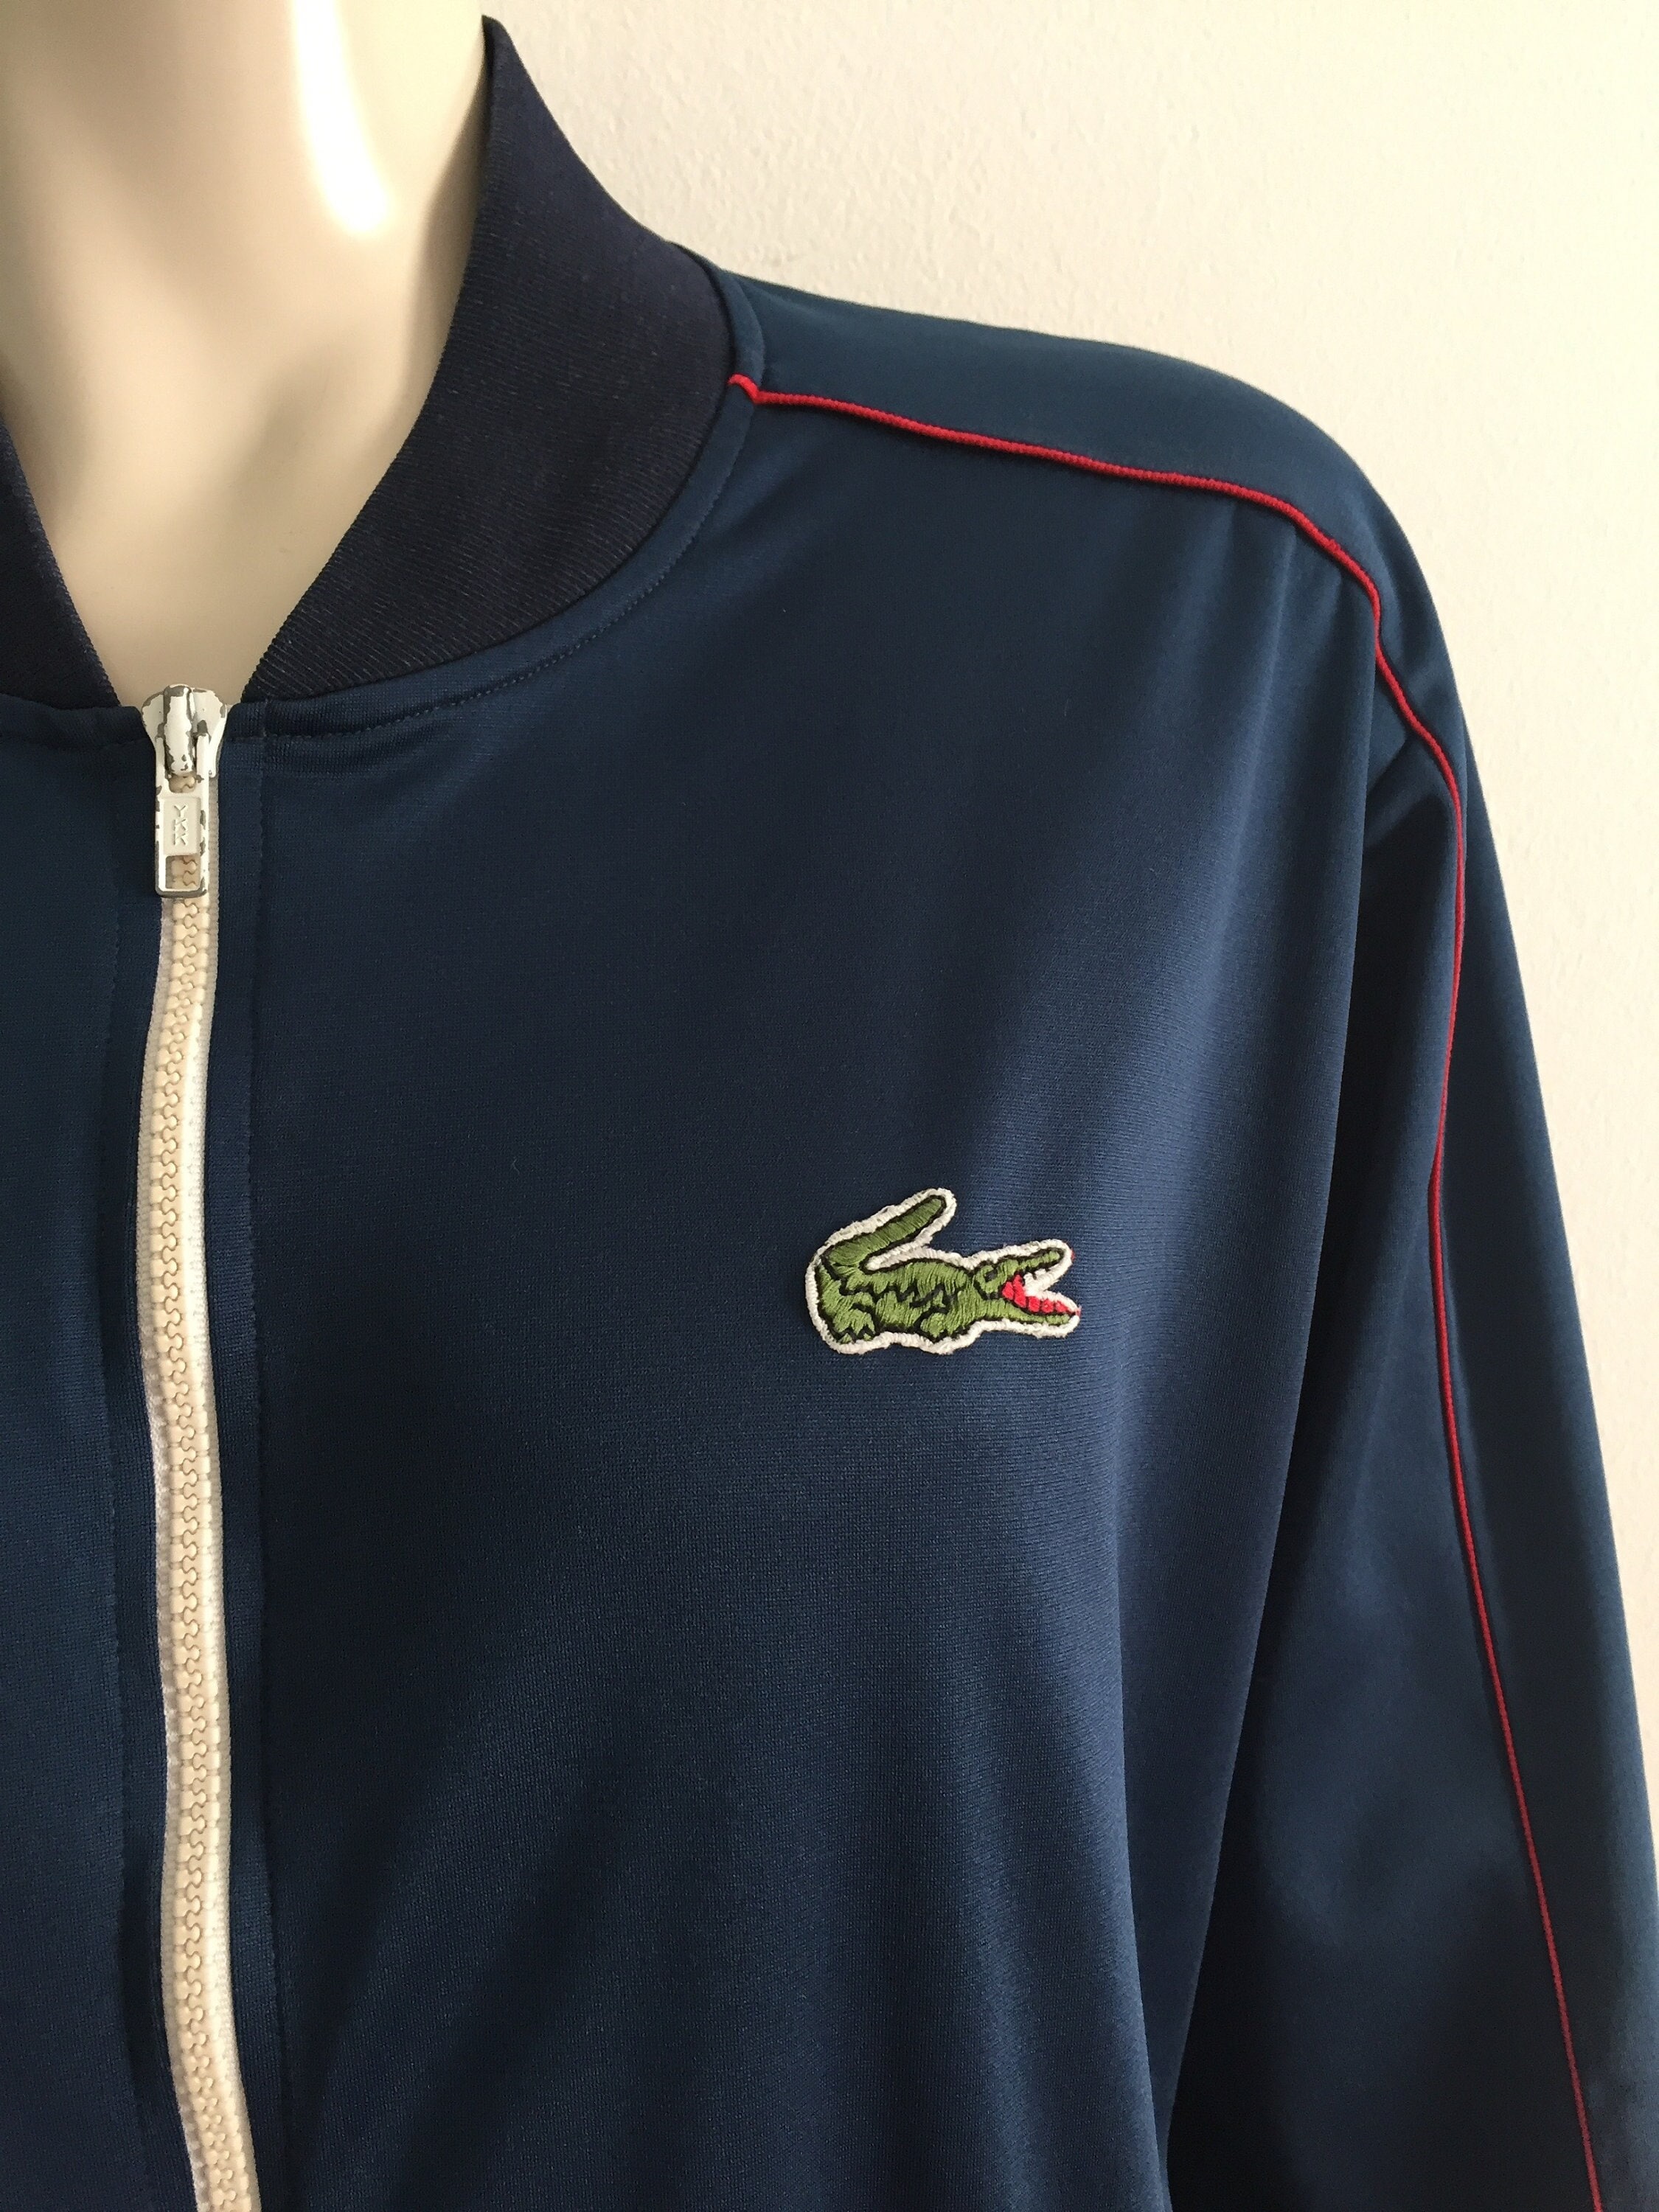 Lacoste Track Top -